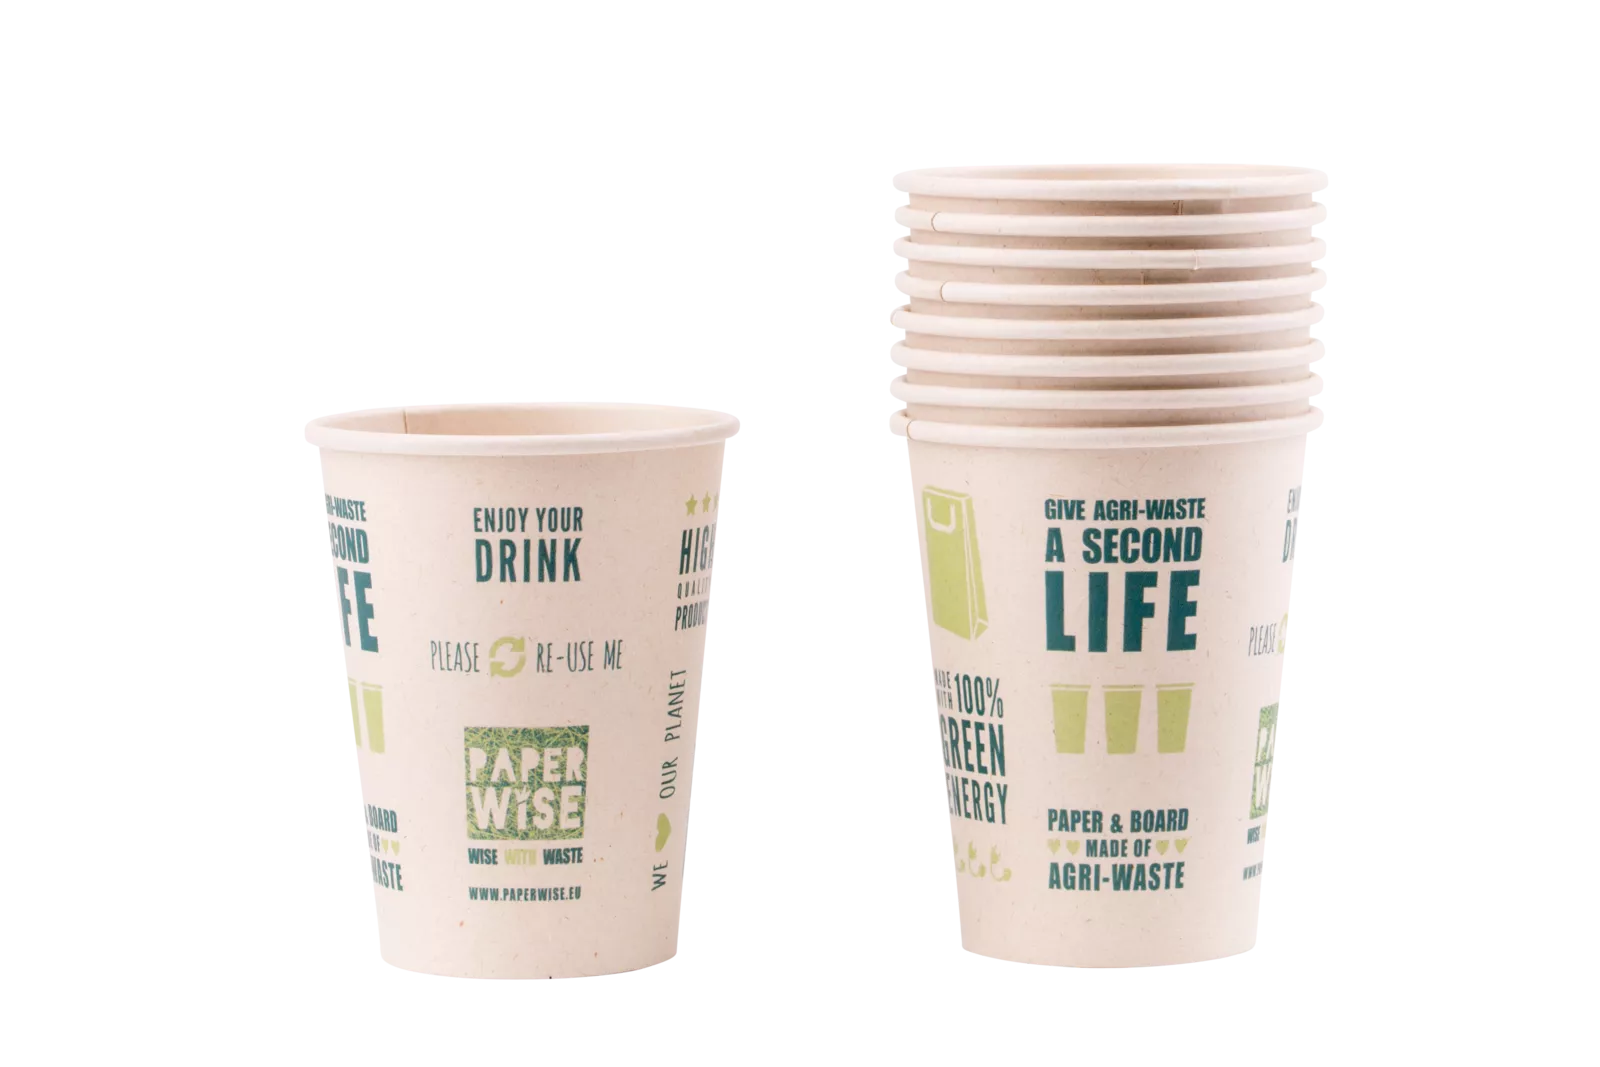 PaperWise bio cup environmentally friendly disposable paper tea coffee drinking cup packaging office6c